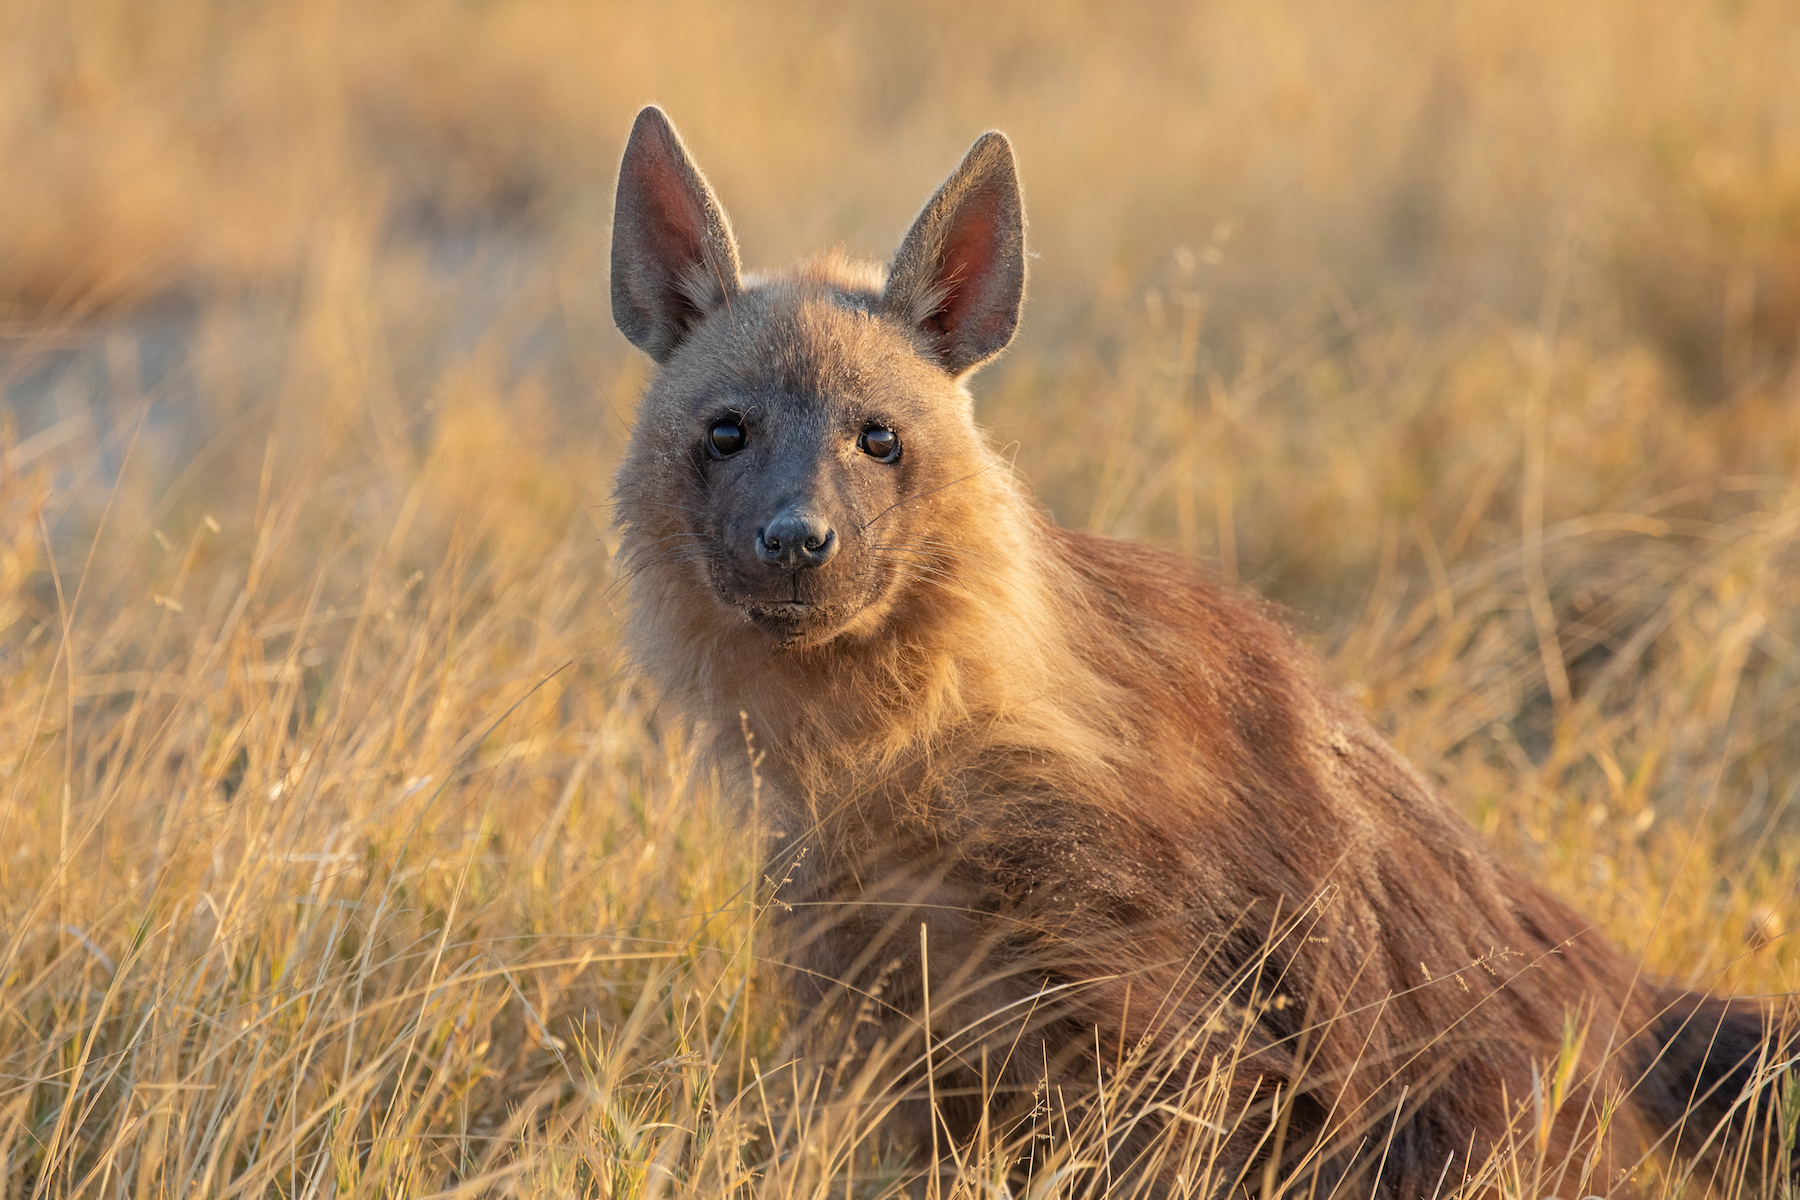 Spending time with Brown Hyenas is a highlight of our wildlife photography tour to Botswana